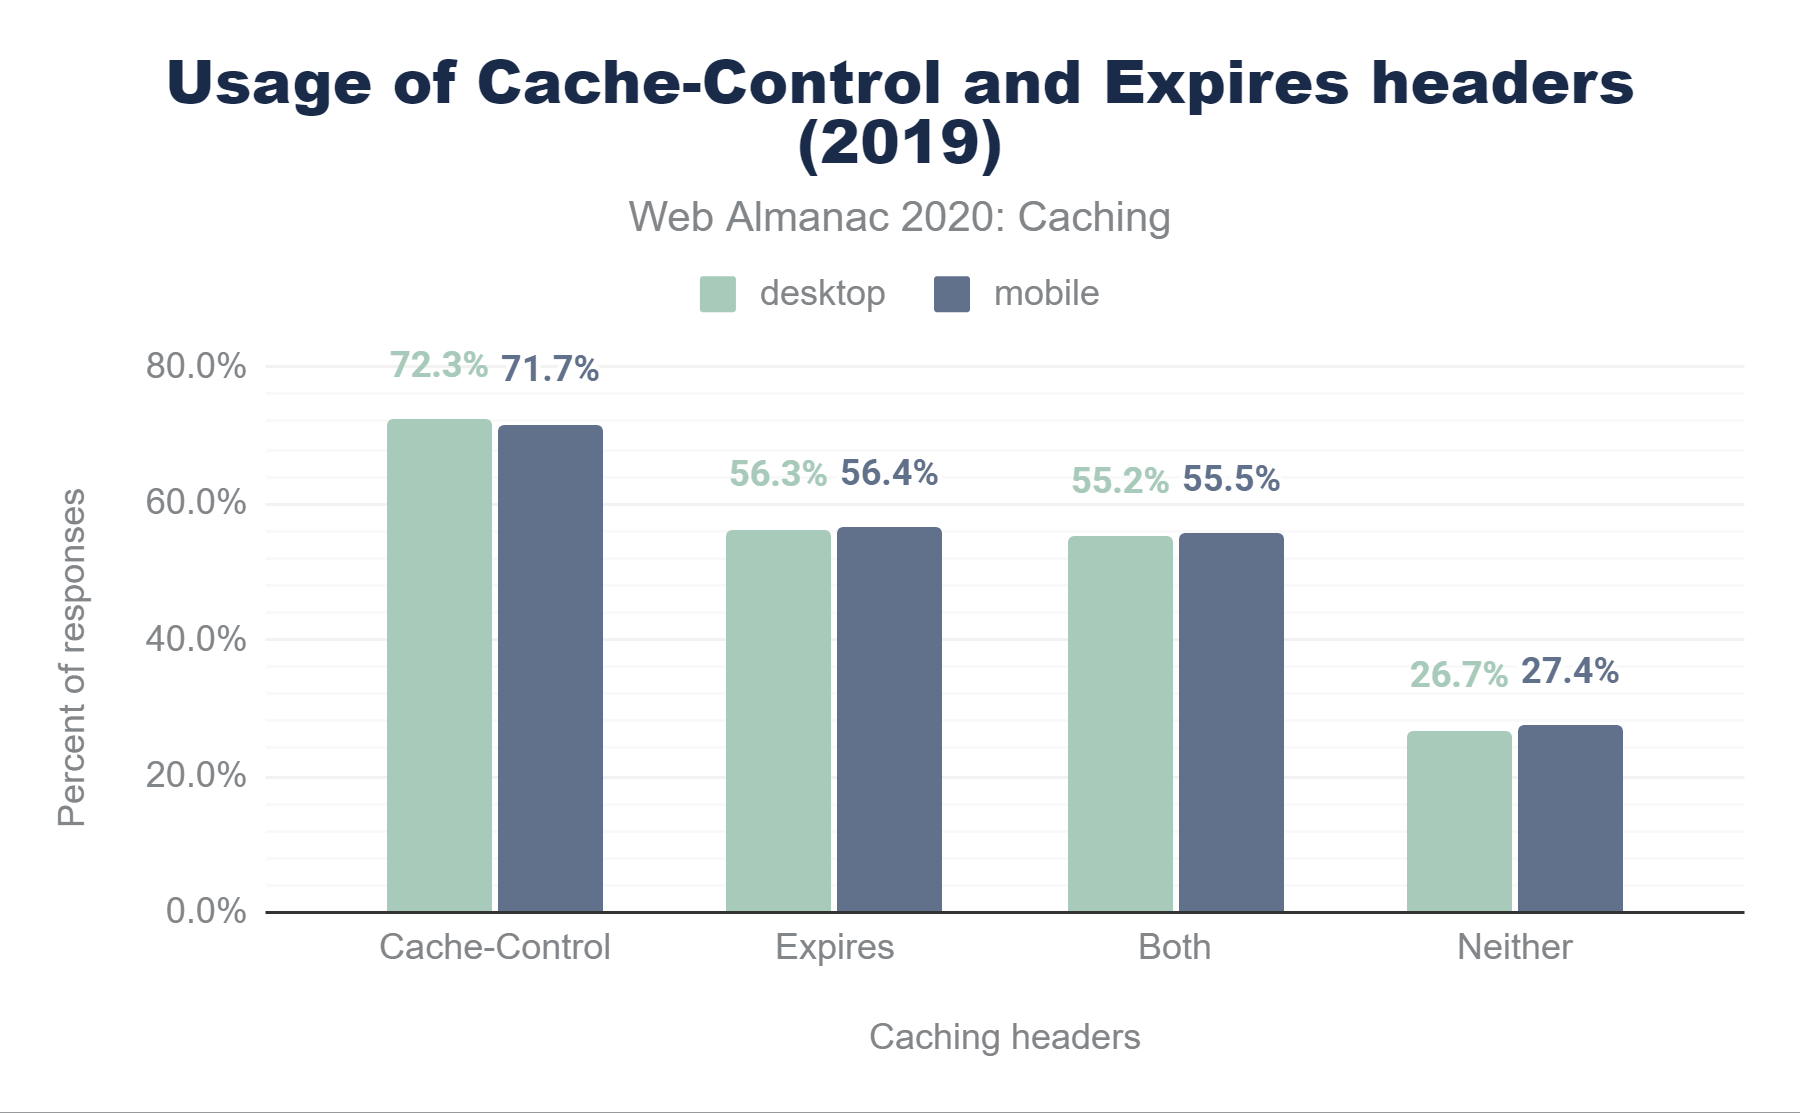 Usage of Cache-Control and Expires headers in 2019.